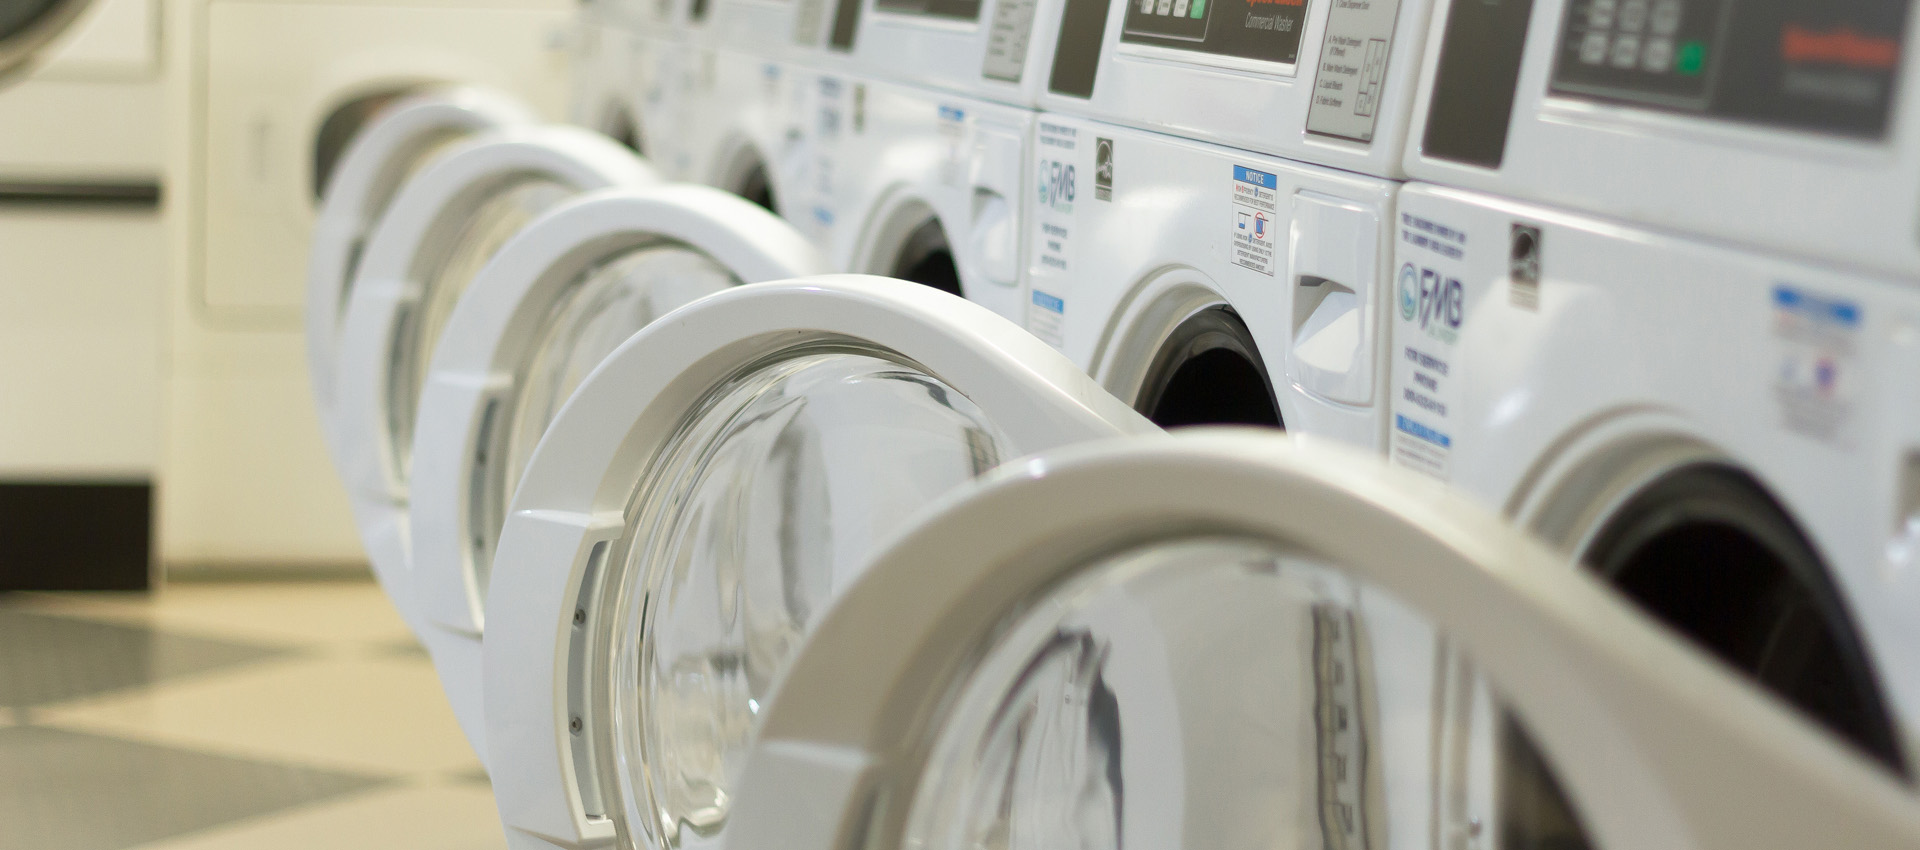 Listen to Your Laundry Equipment